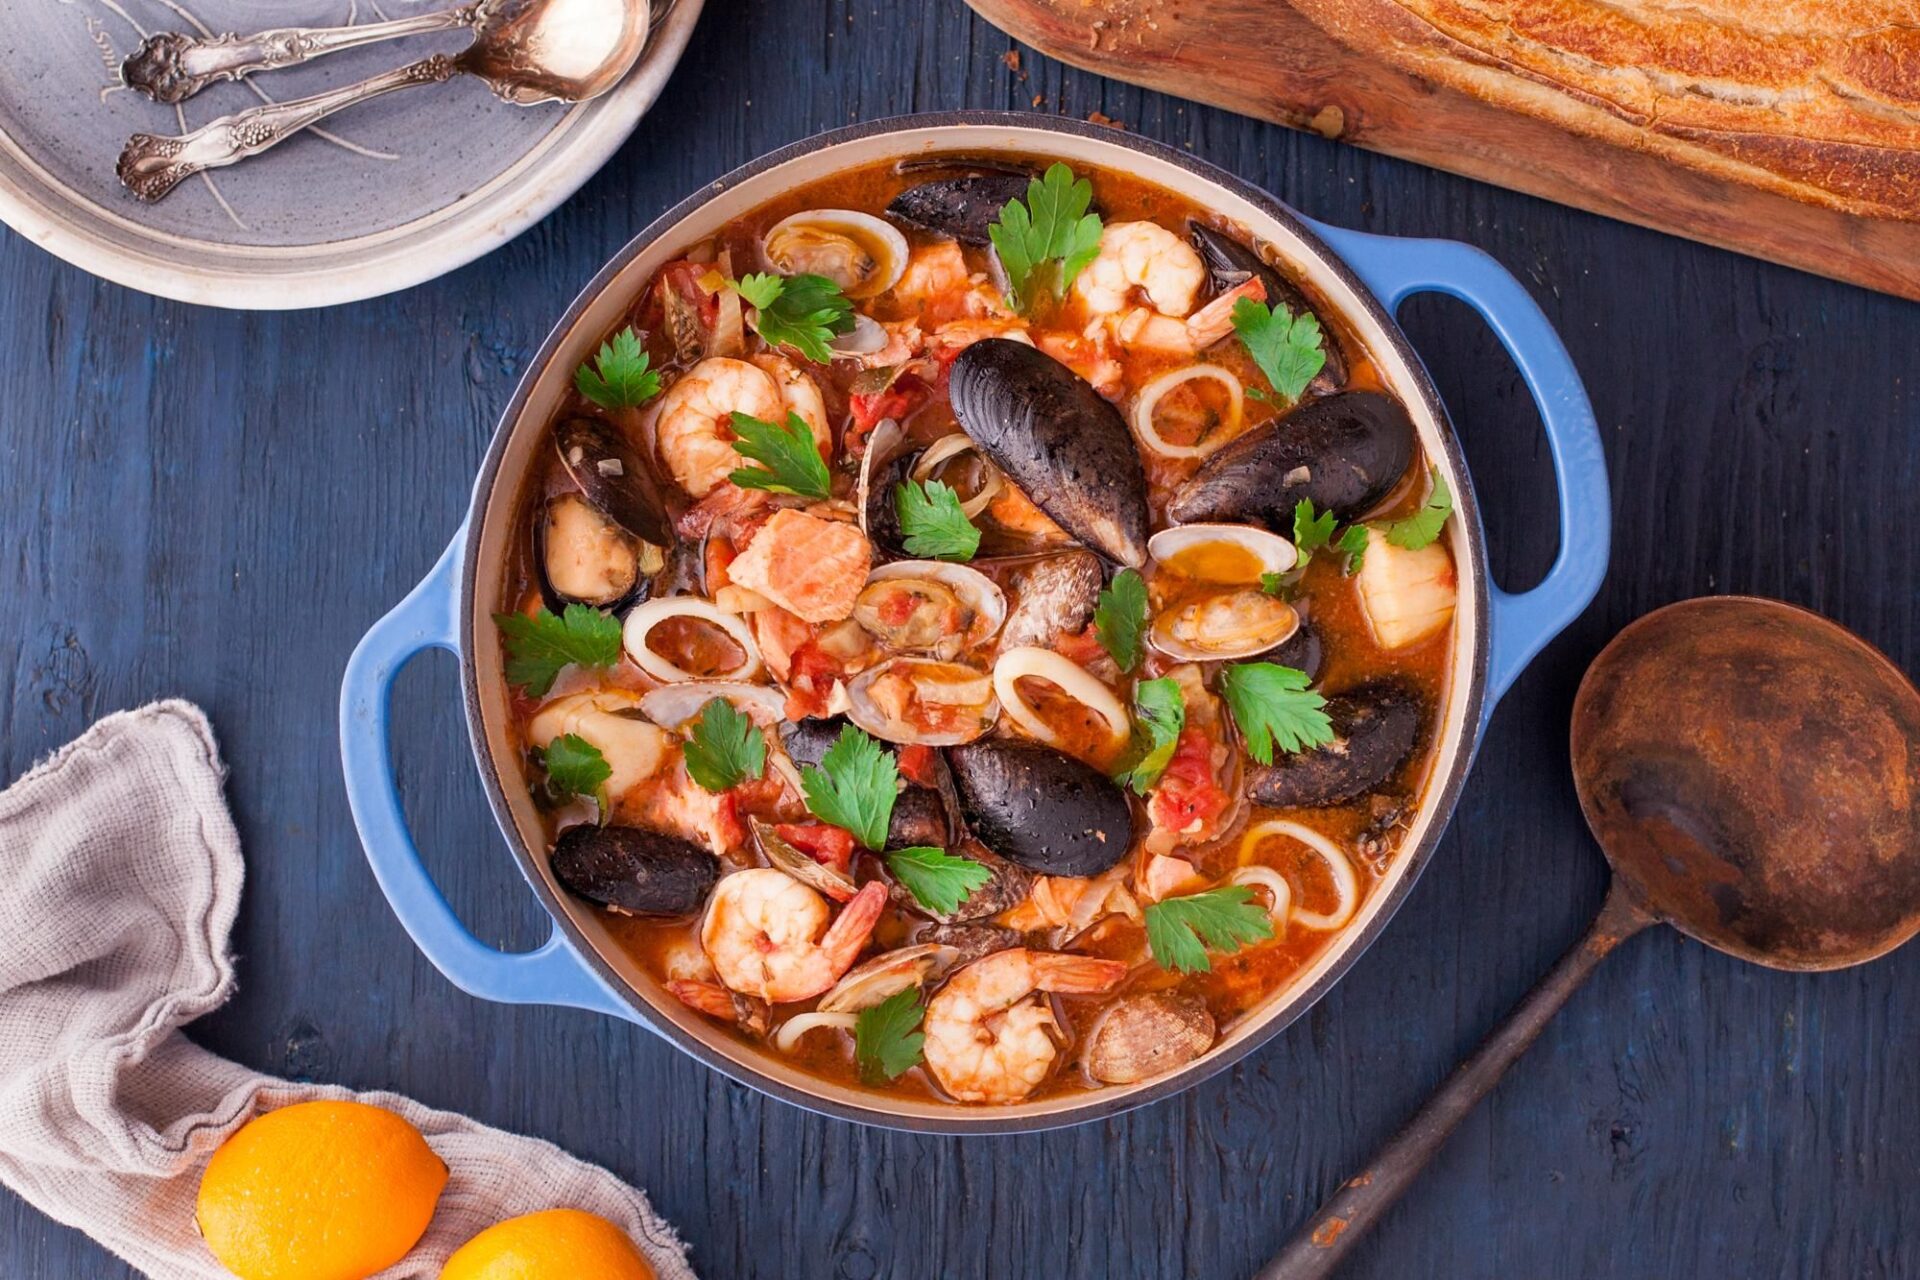 Keto Cioppino: A Flavorful Seafood Medley, Minus the Carbs